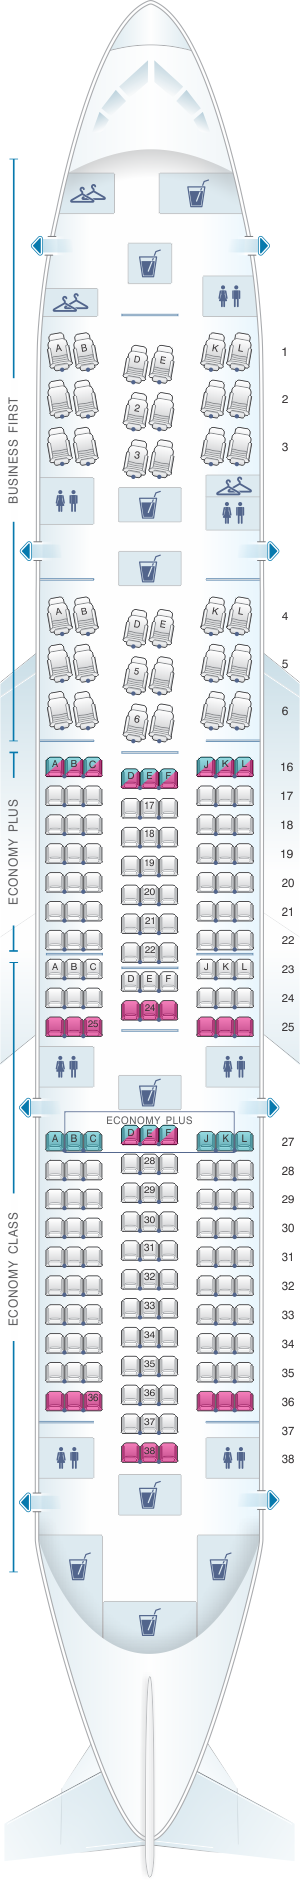 Seat map for United Airlines Boeing B787-8 Dreamliner